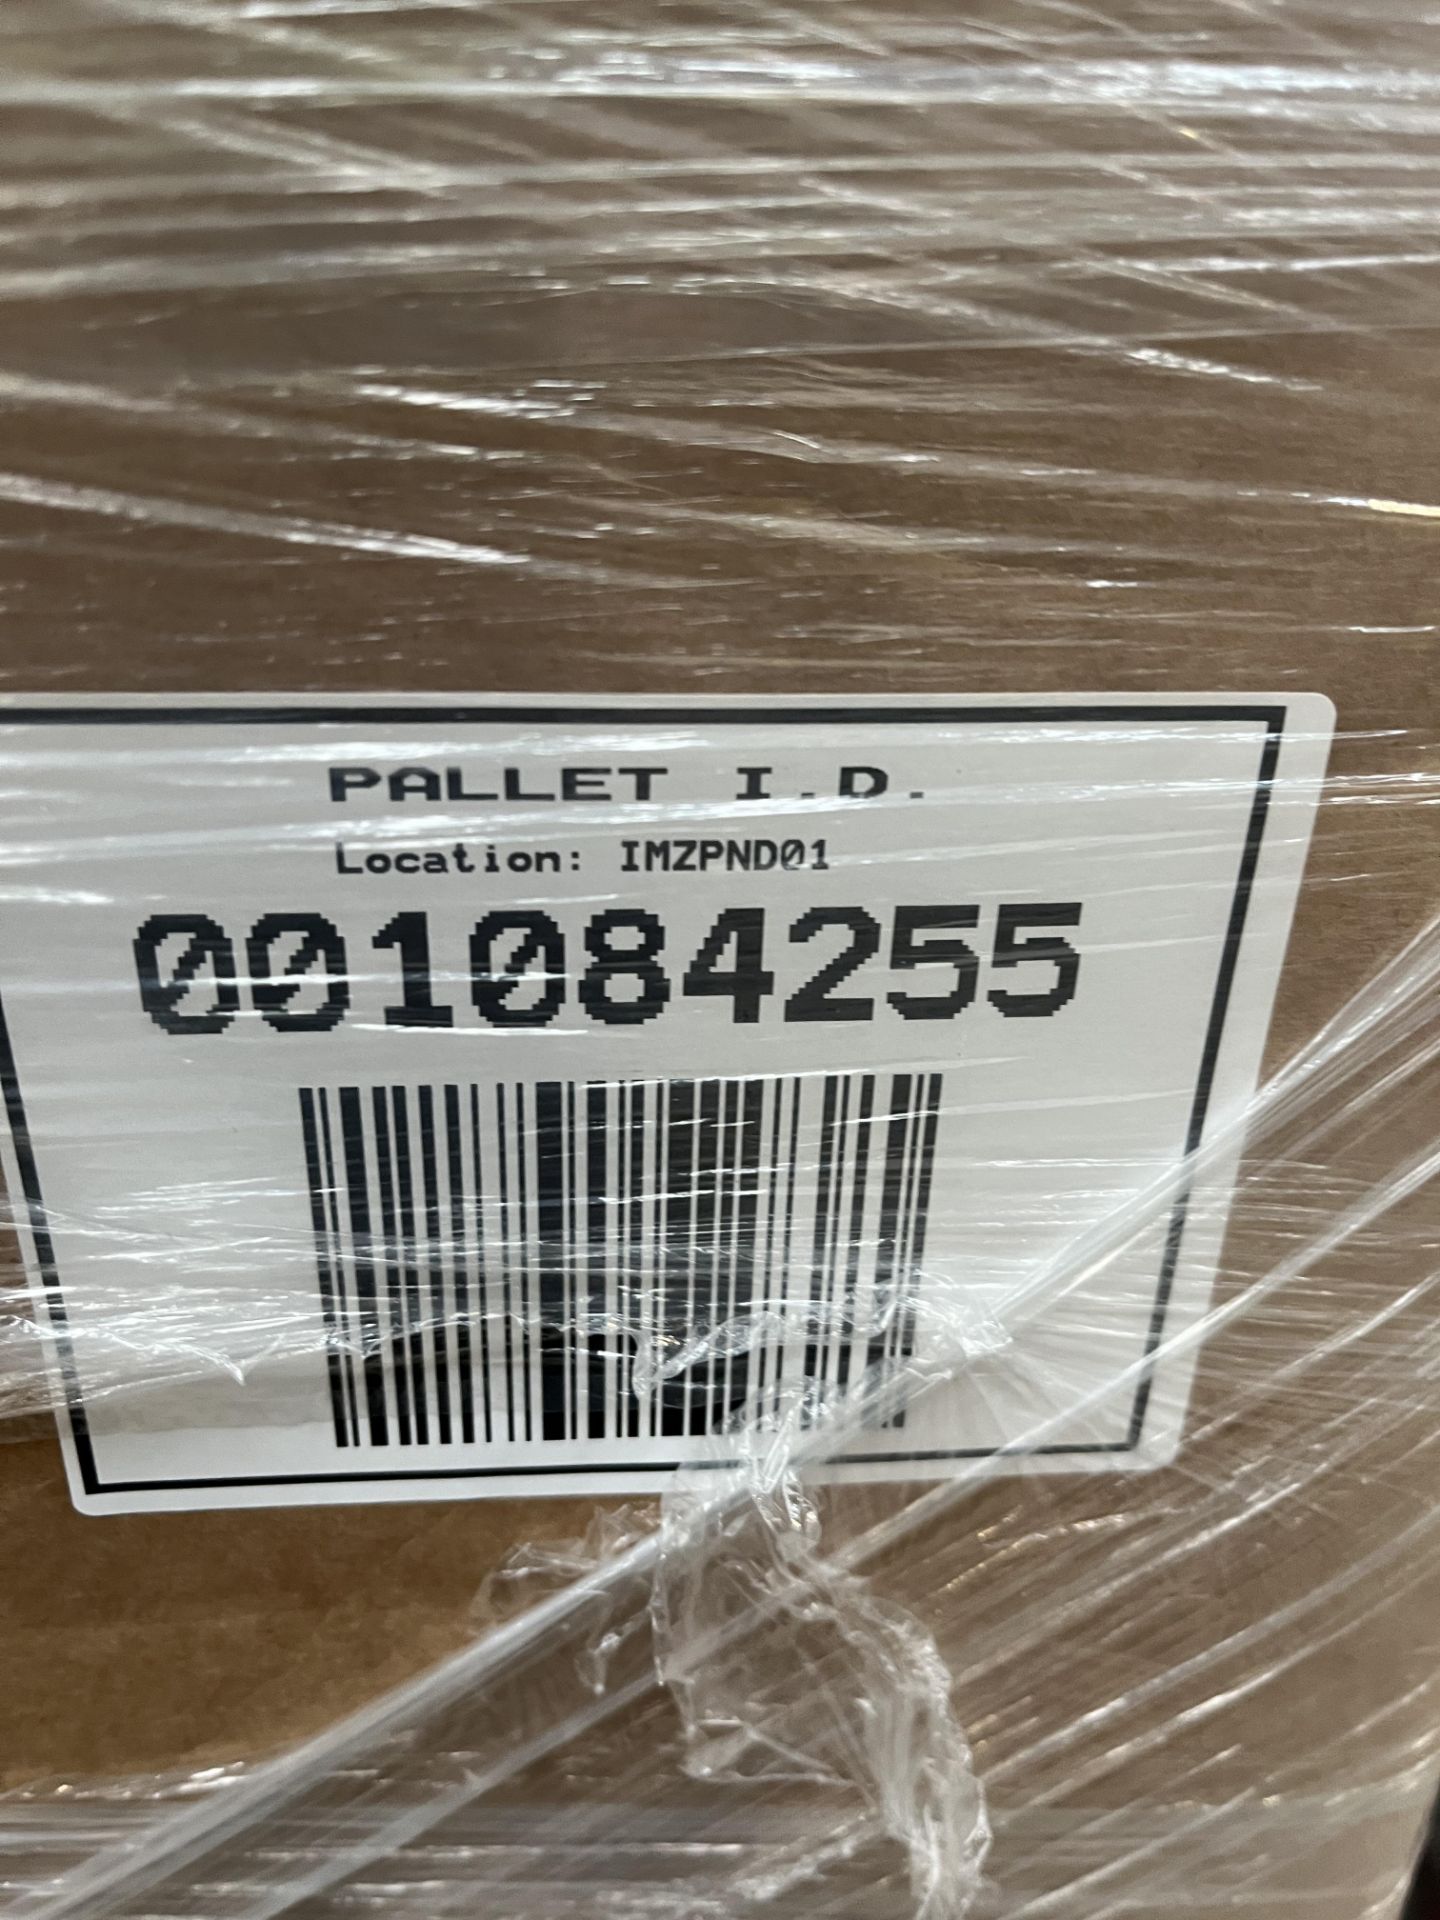 (REF001084255) 1 Pallet of Customer Returns - Retail value at new £1,726.15 - Image 3 of 5